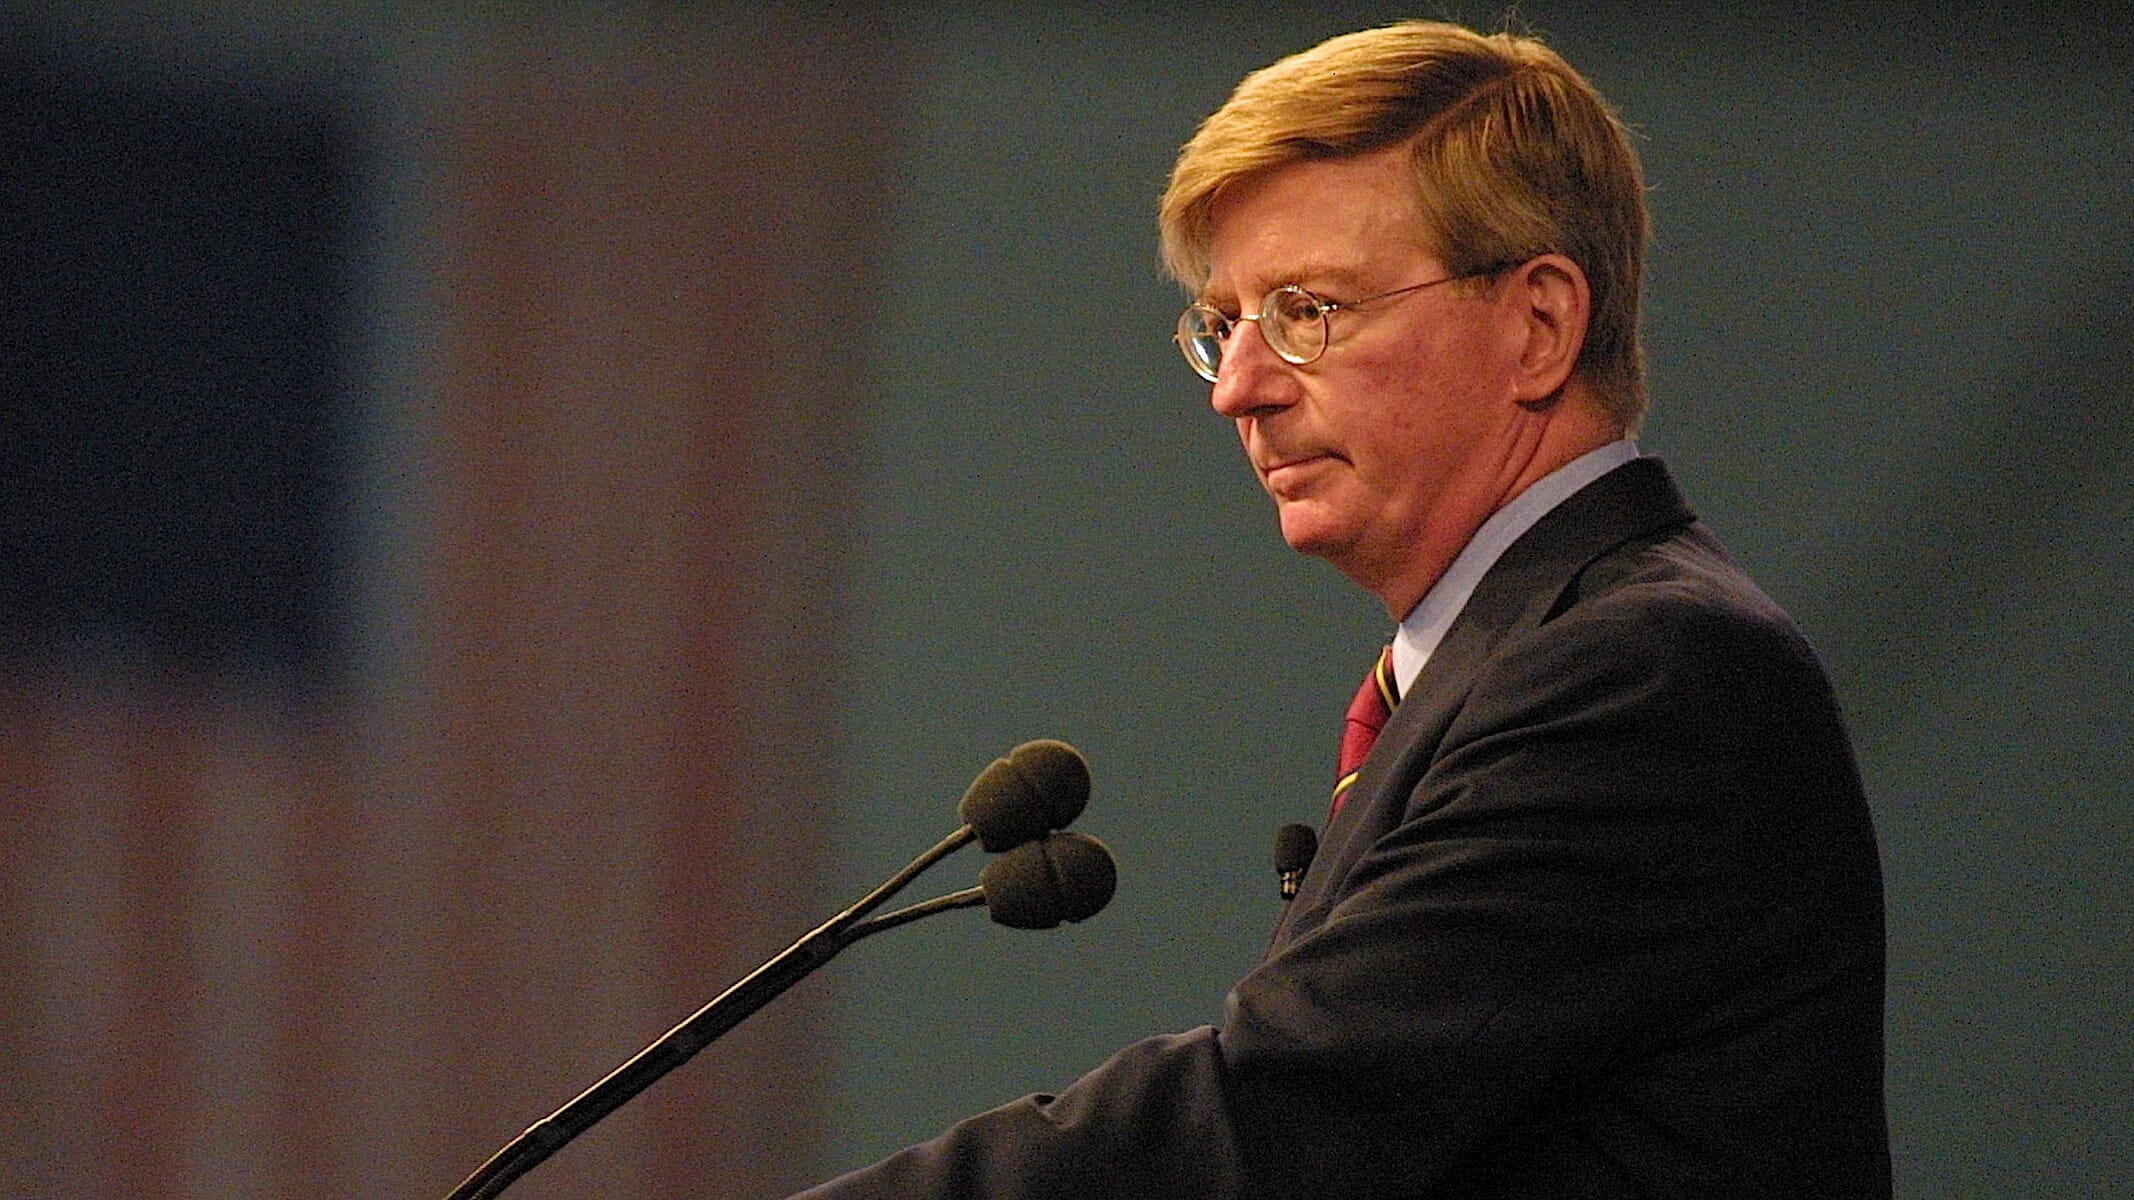 George Will: To Young American Voters, GOP is “The Dumb Party”